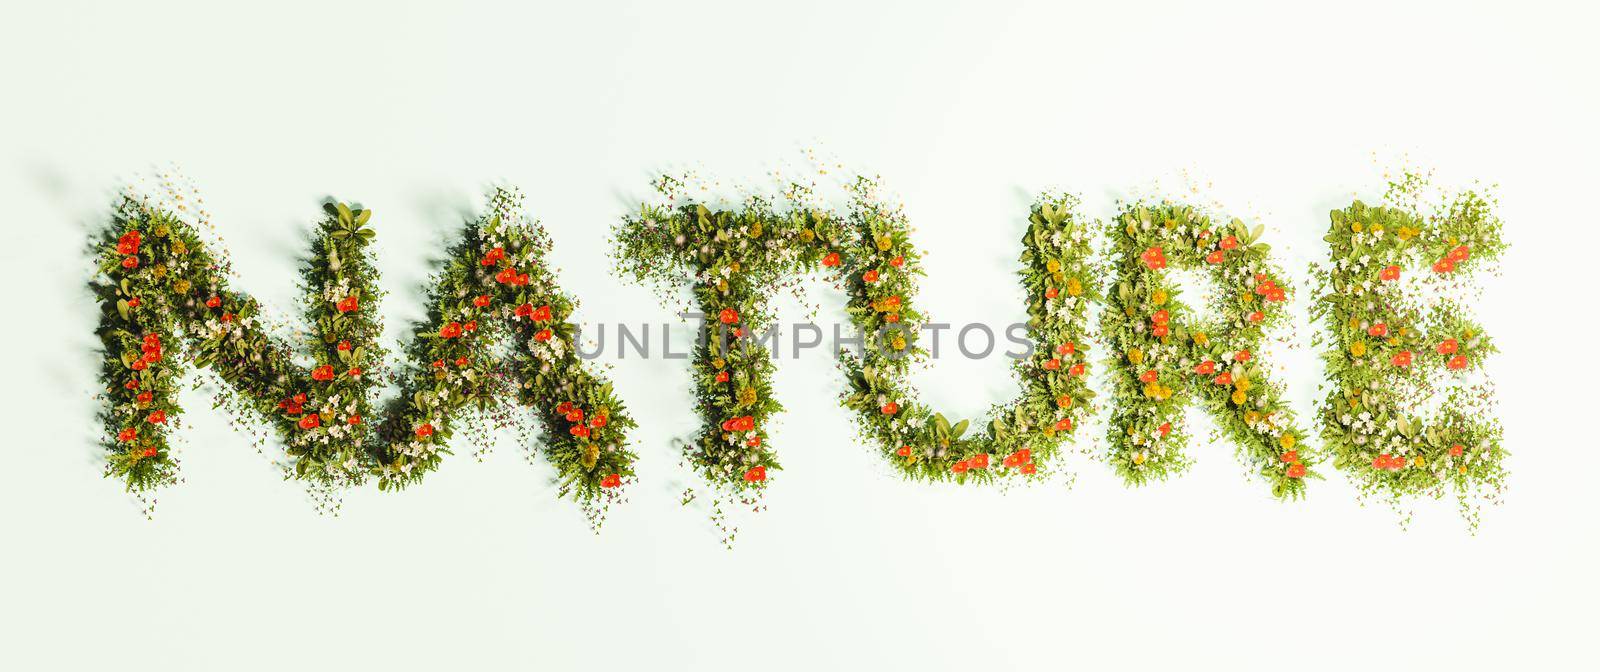 nature sign written with flowers and grass by asolano